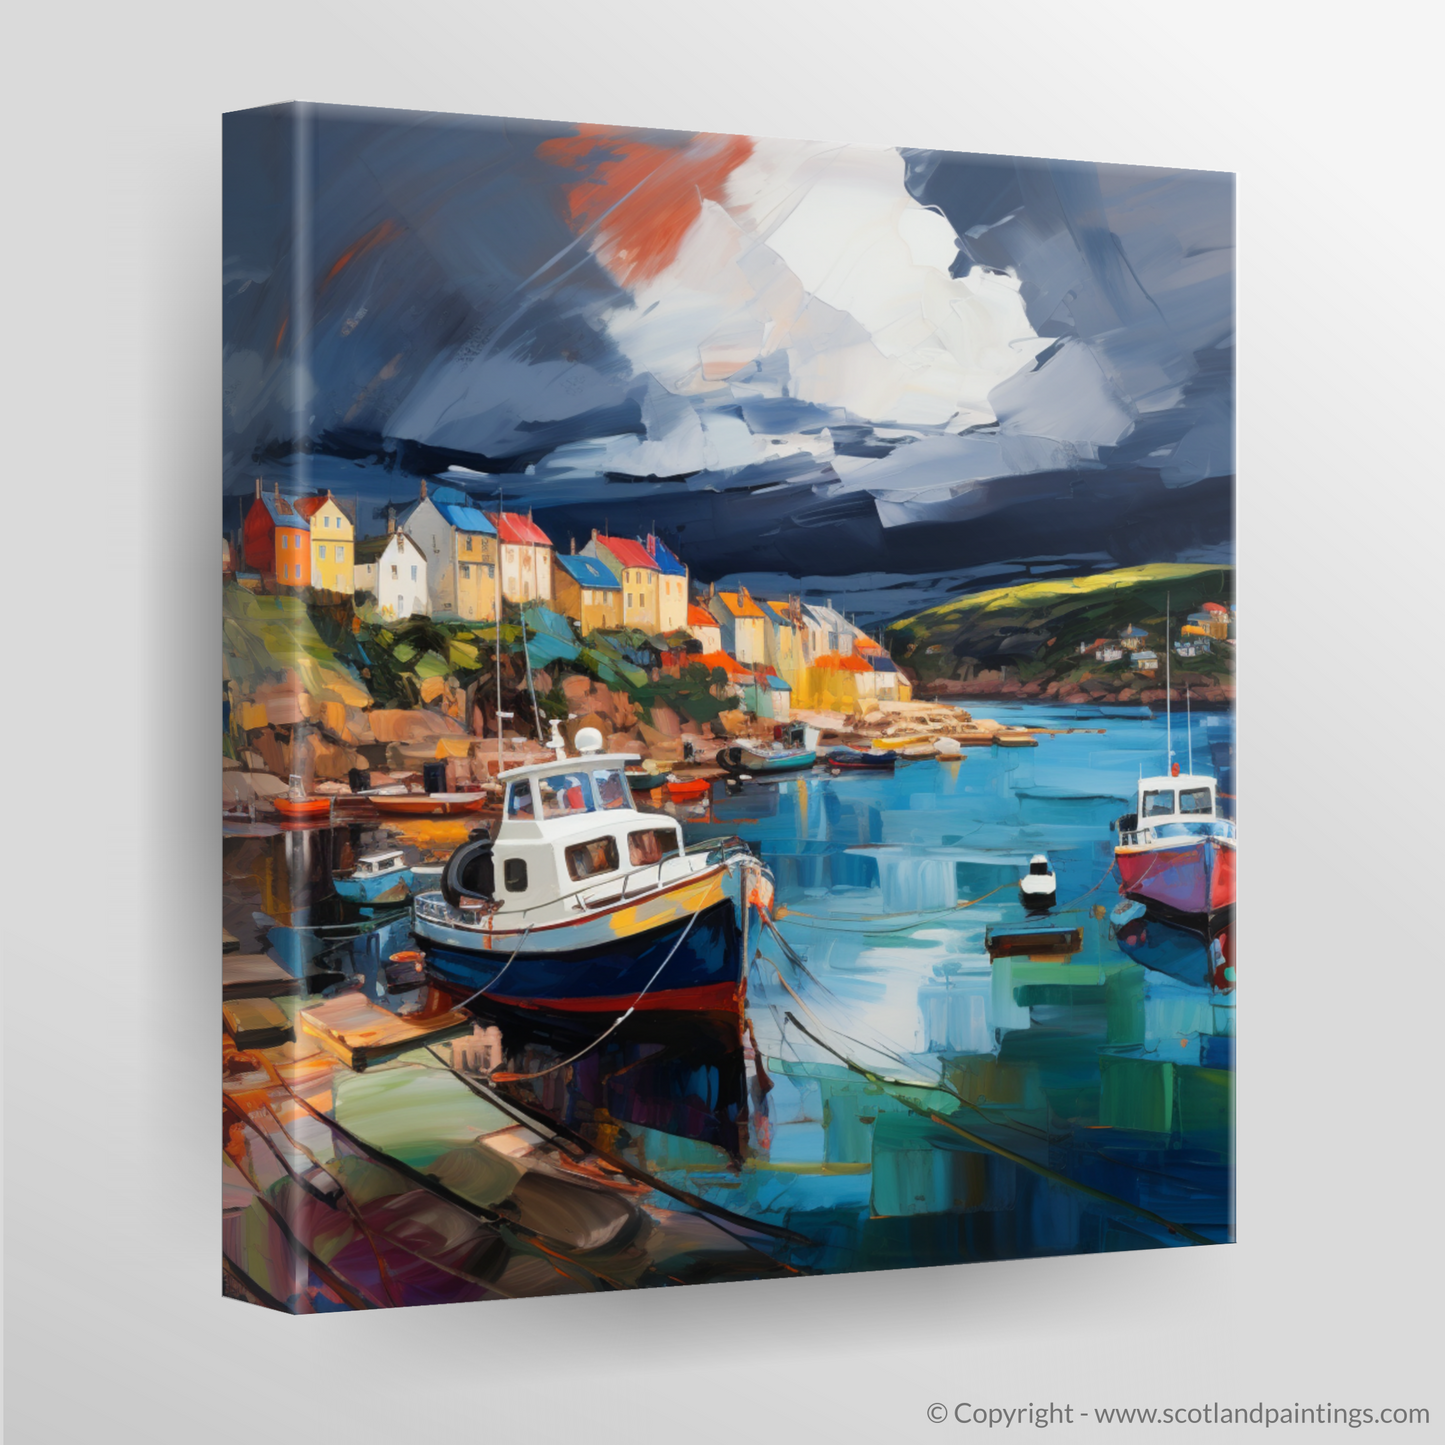 Canvas Print of St Abba's Harbour with a stormy sky